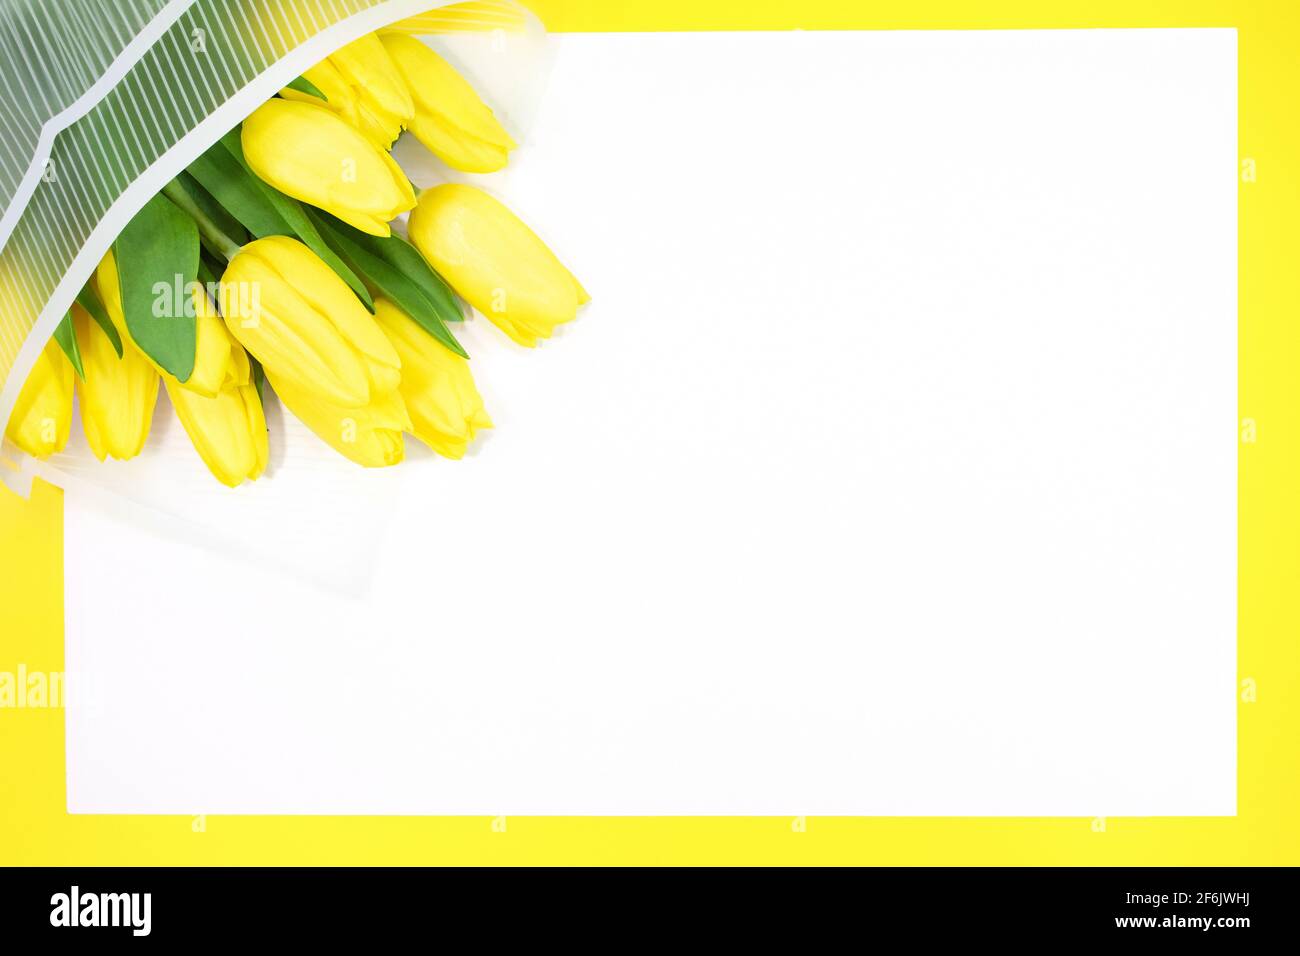 Holiday card. Bouquet of yellow tulips in wrapper with blank sheet for text. Happy birthday, mother's, teacher, International Women's Day, March 8. Co Stock Photo